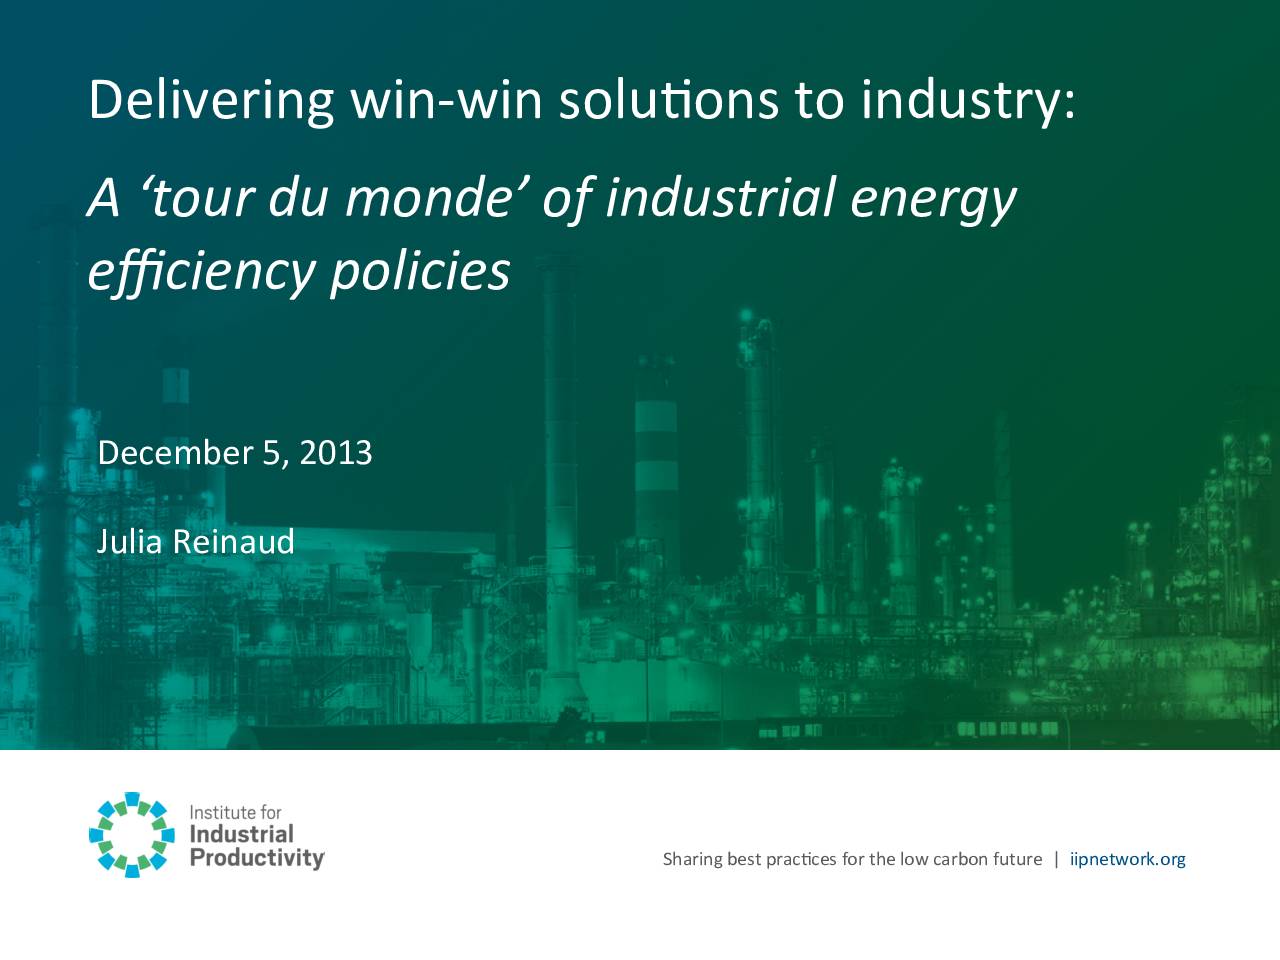 Delivering win-win solutions to industry: A ‘tour du monde’ of industrial energy efficiency policies